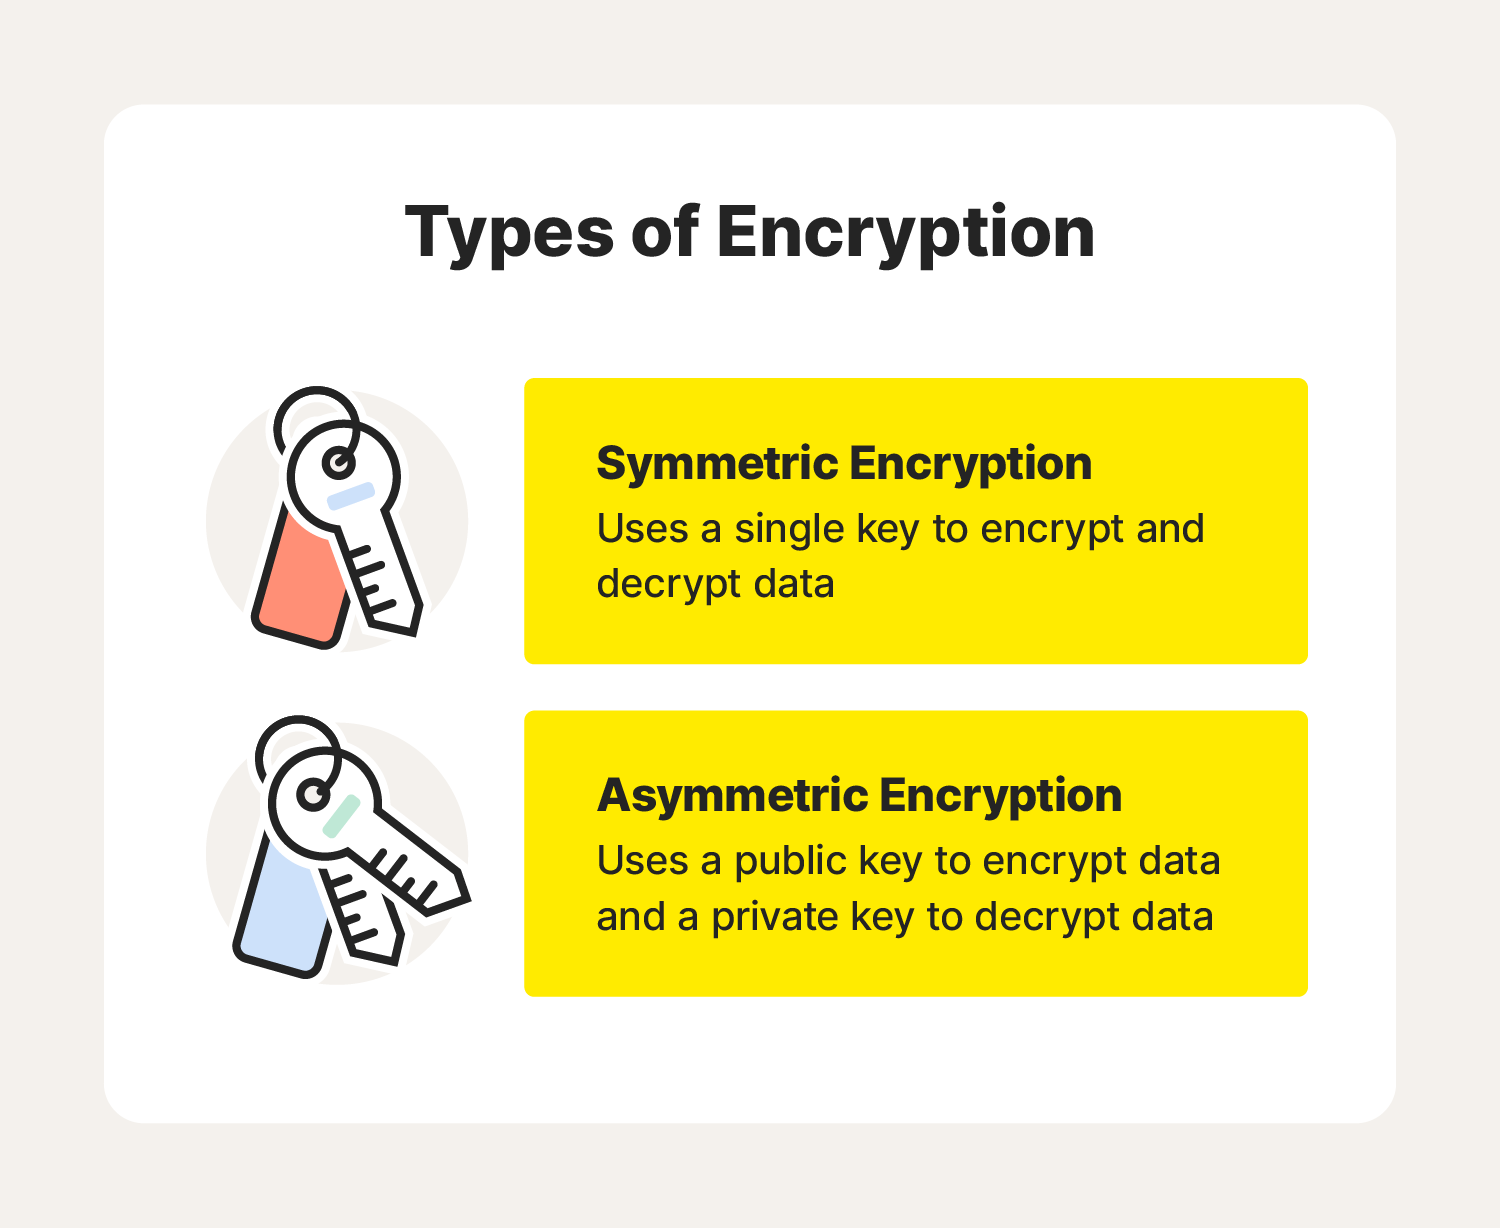 An image explains the difference between symmetric and asymmetric encryption, further answering the question, "What is encryption?"